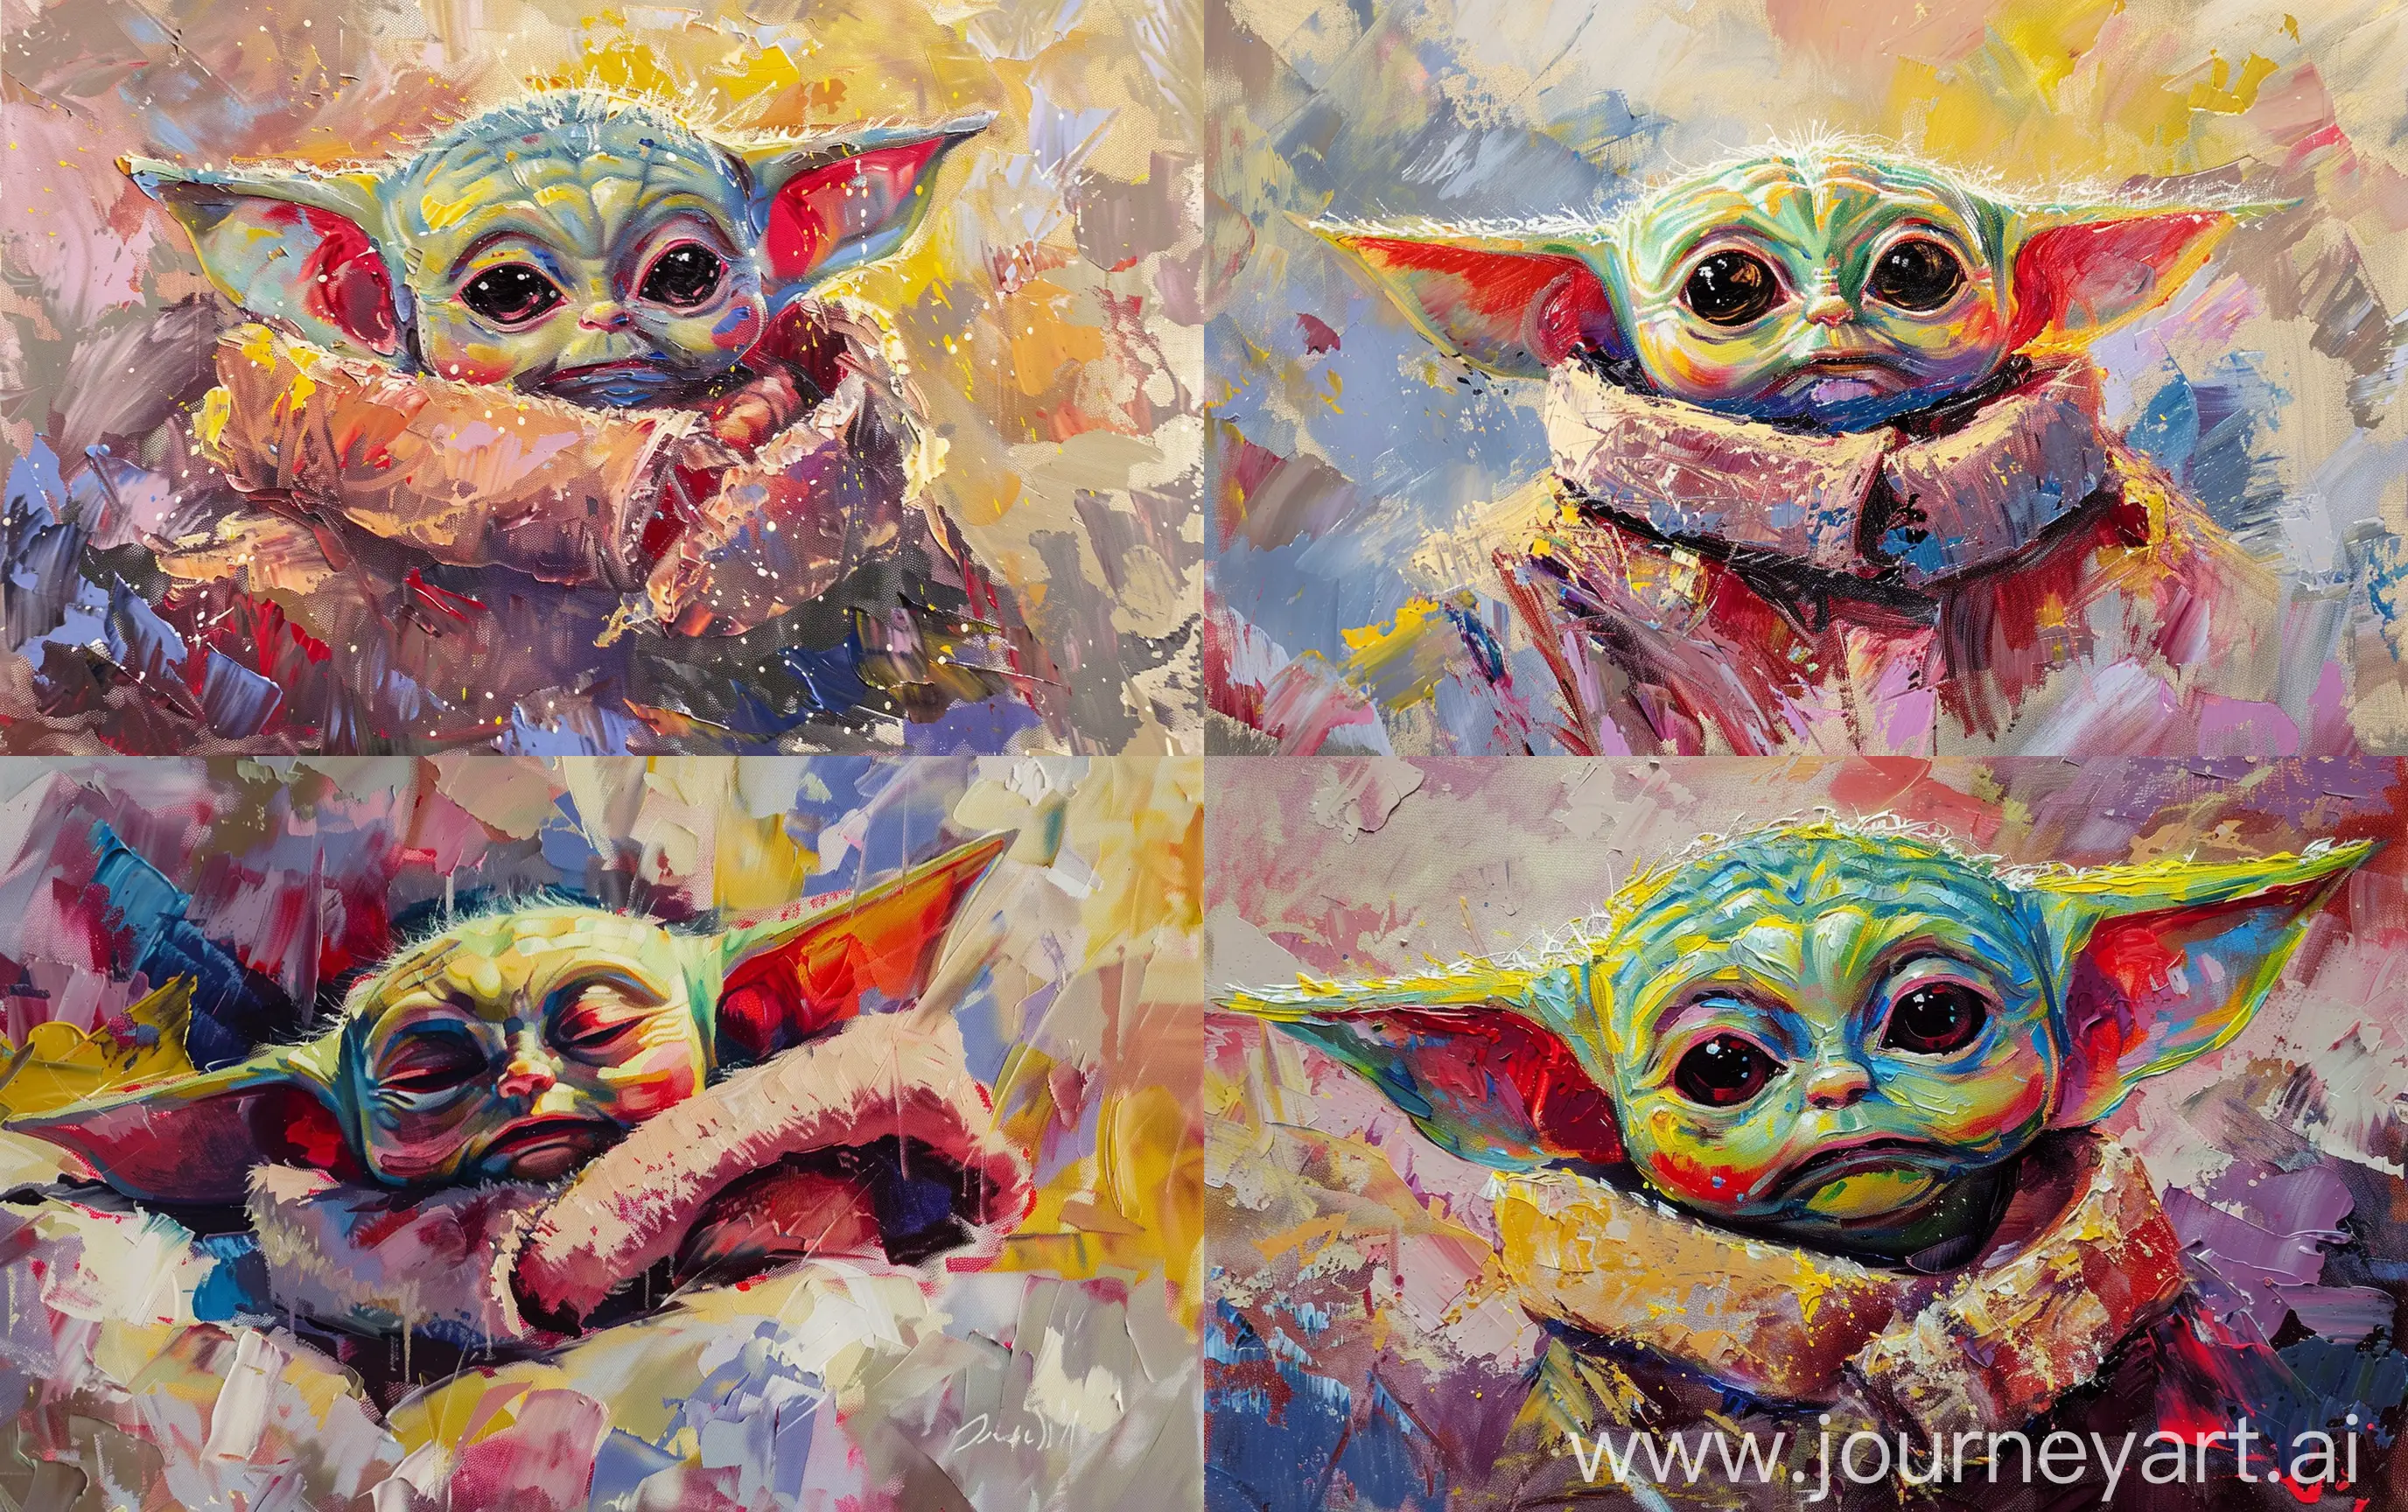 Impressionistic-Oil-Painting-of-Baby-Yoda-in-Serene-Pastel-Hues